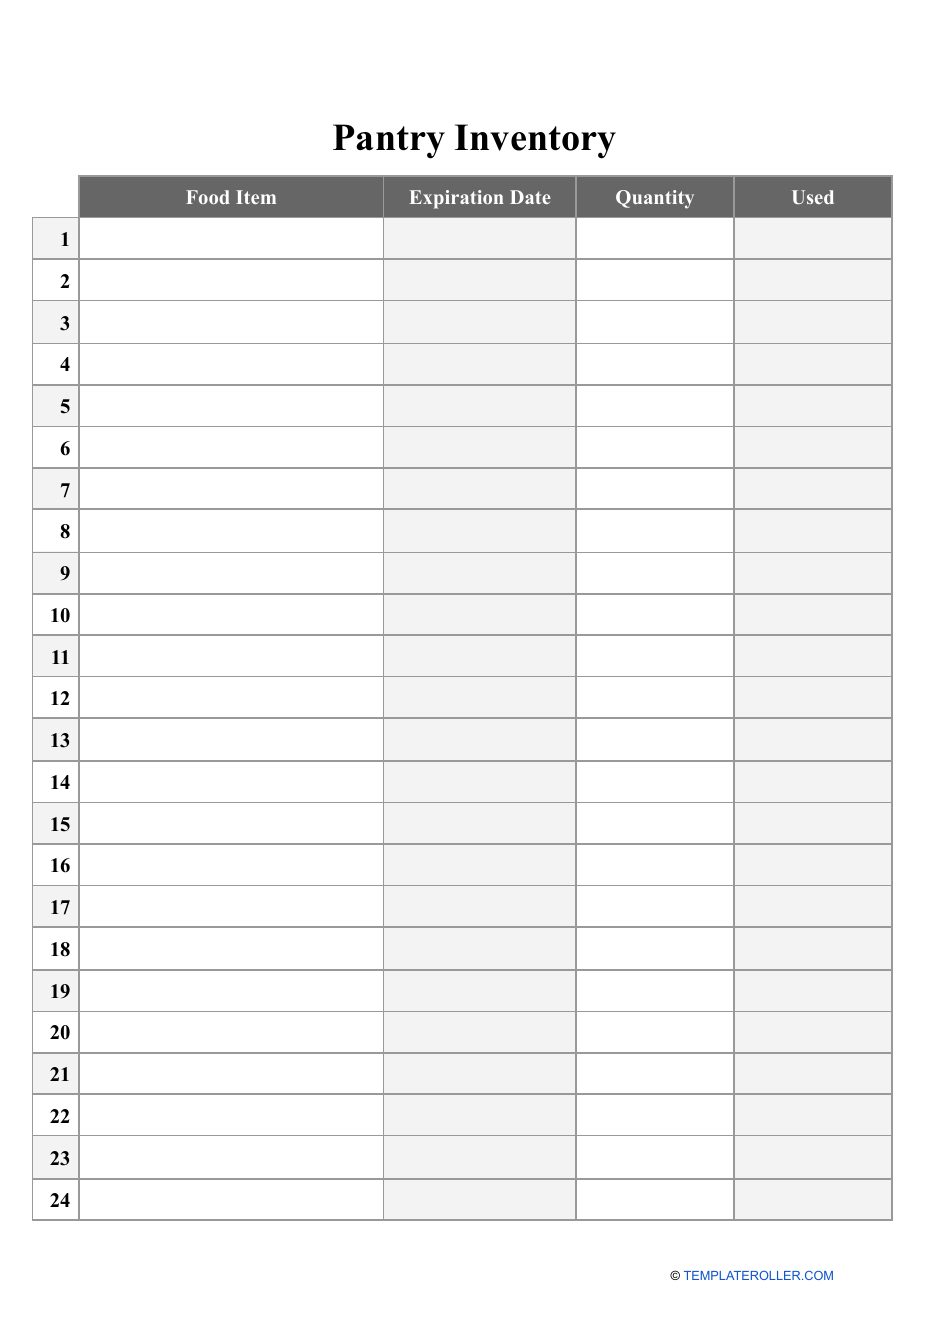 Pantry Inventory Template - Big Table